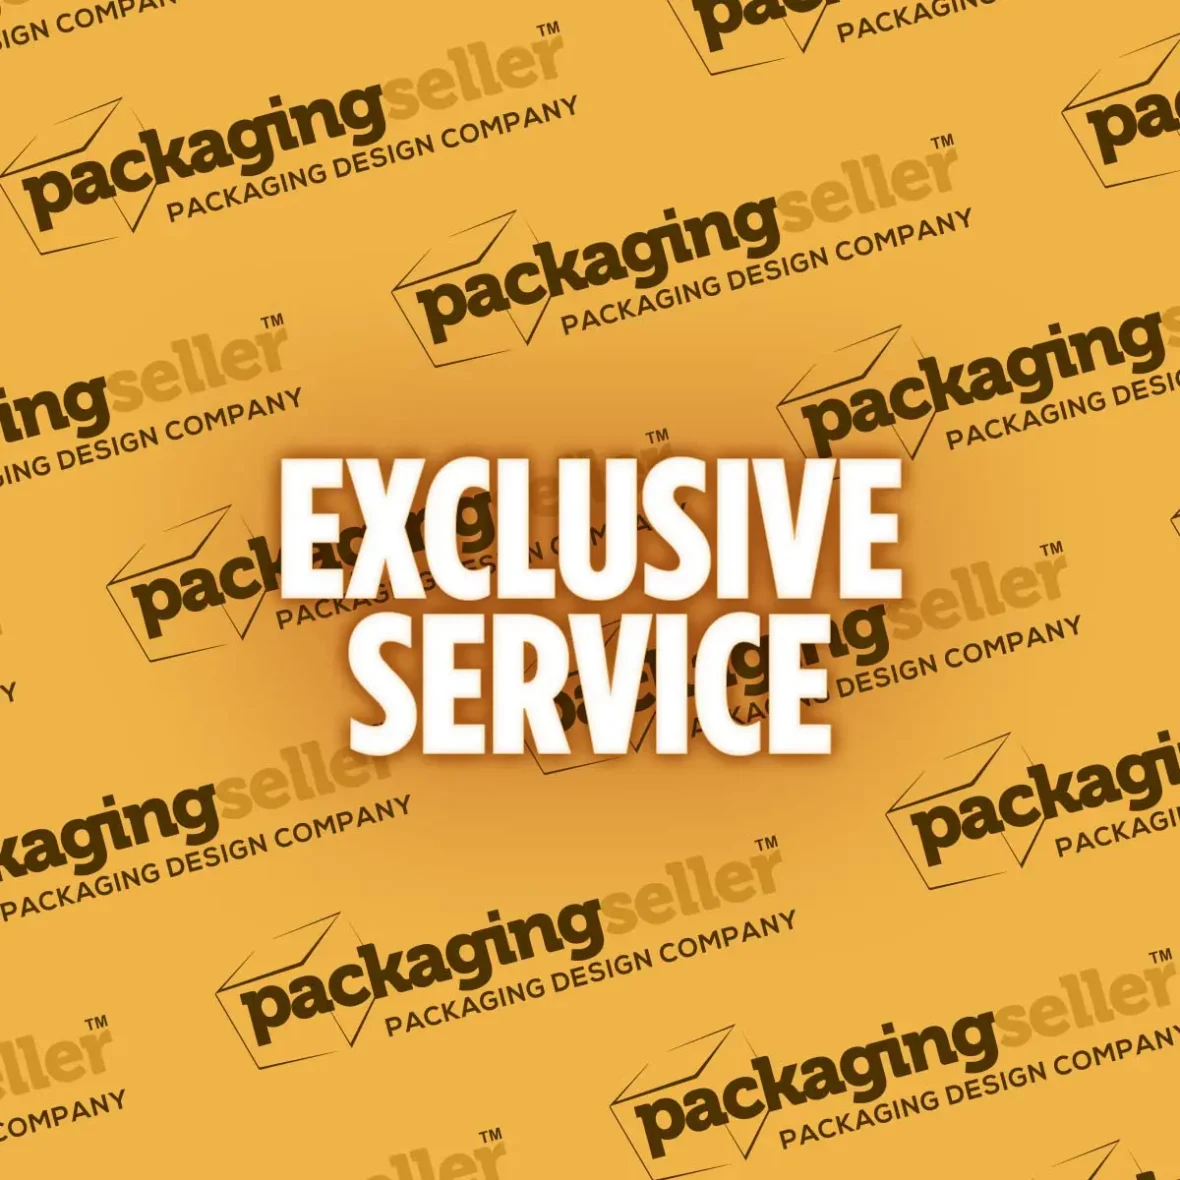 Exclusive Services for Packaging and Label Design